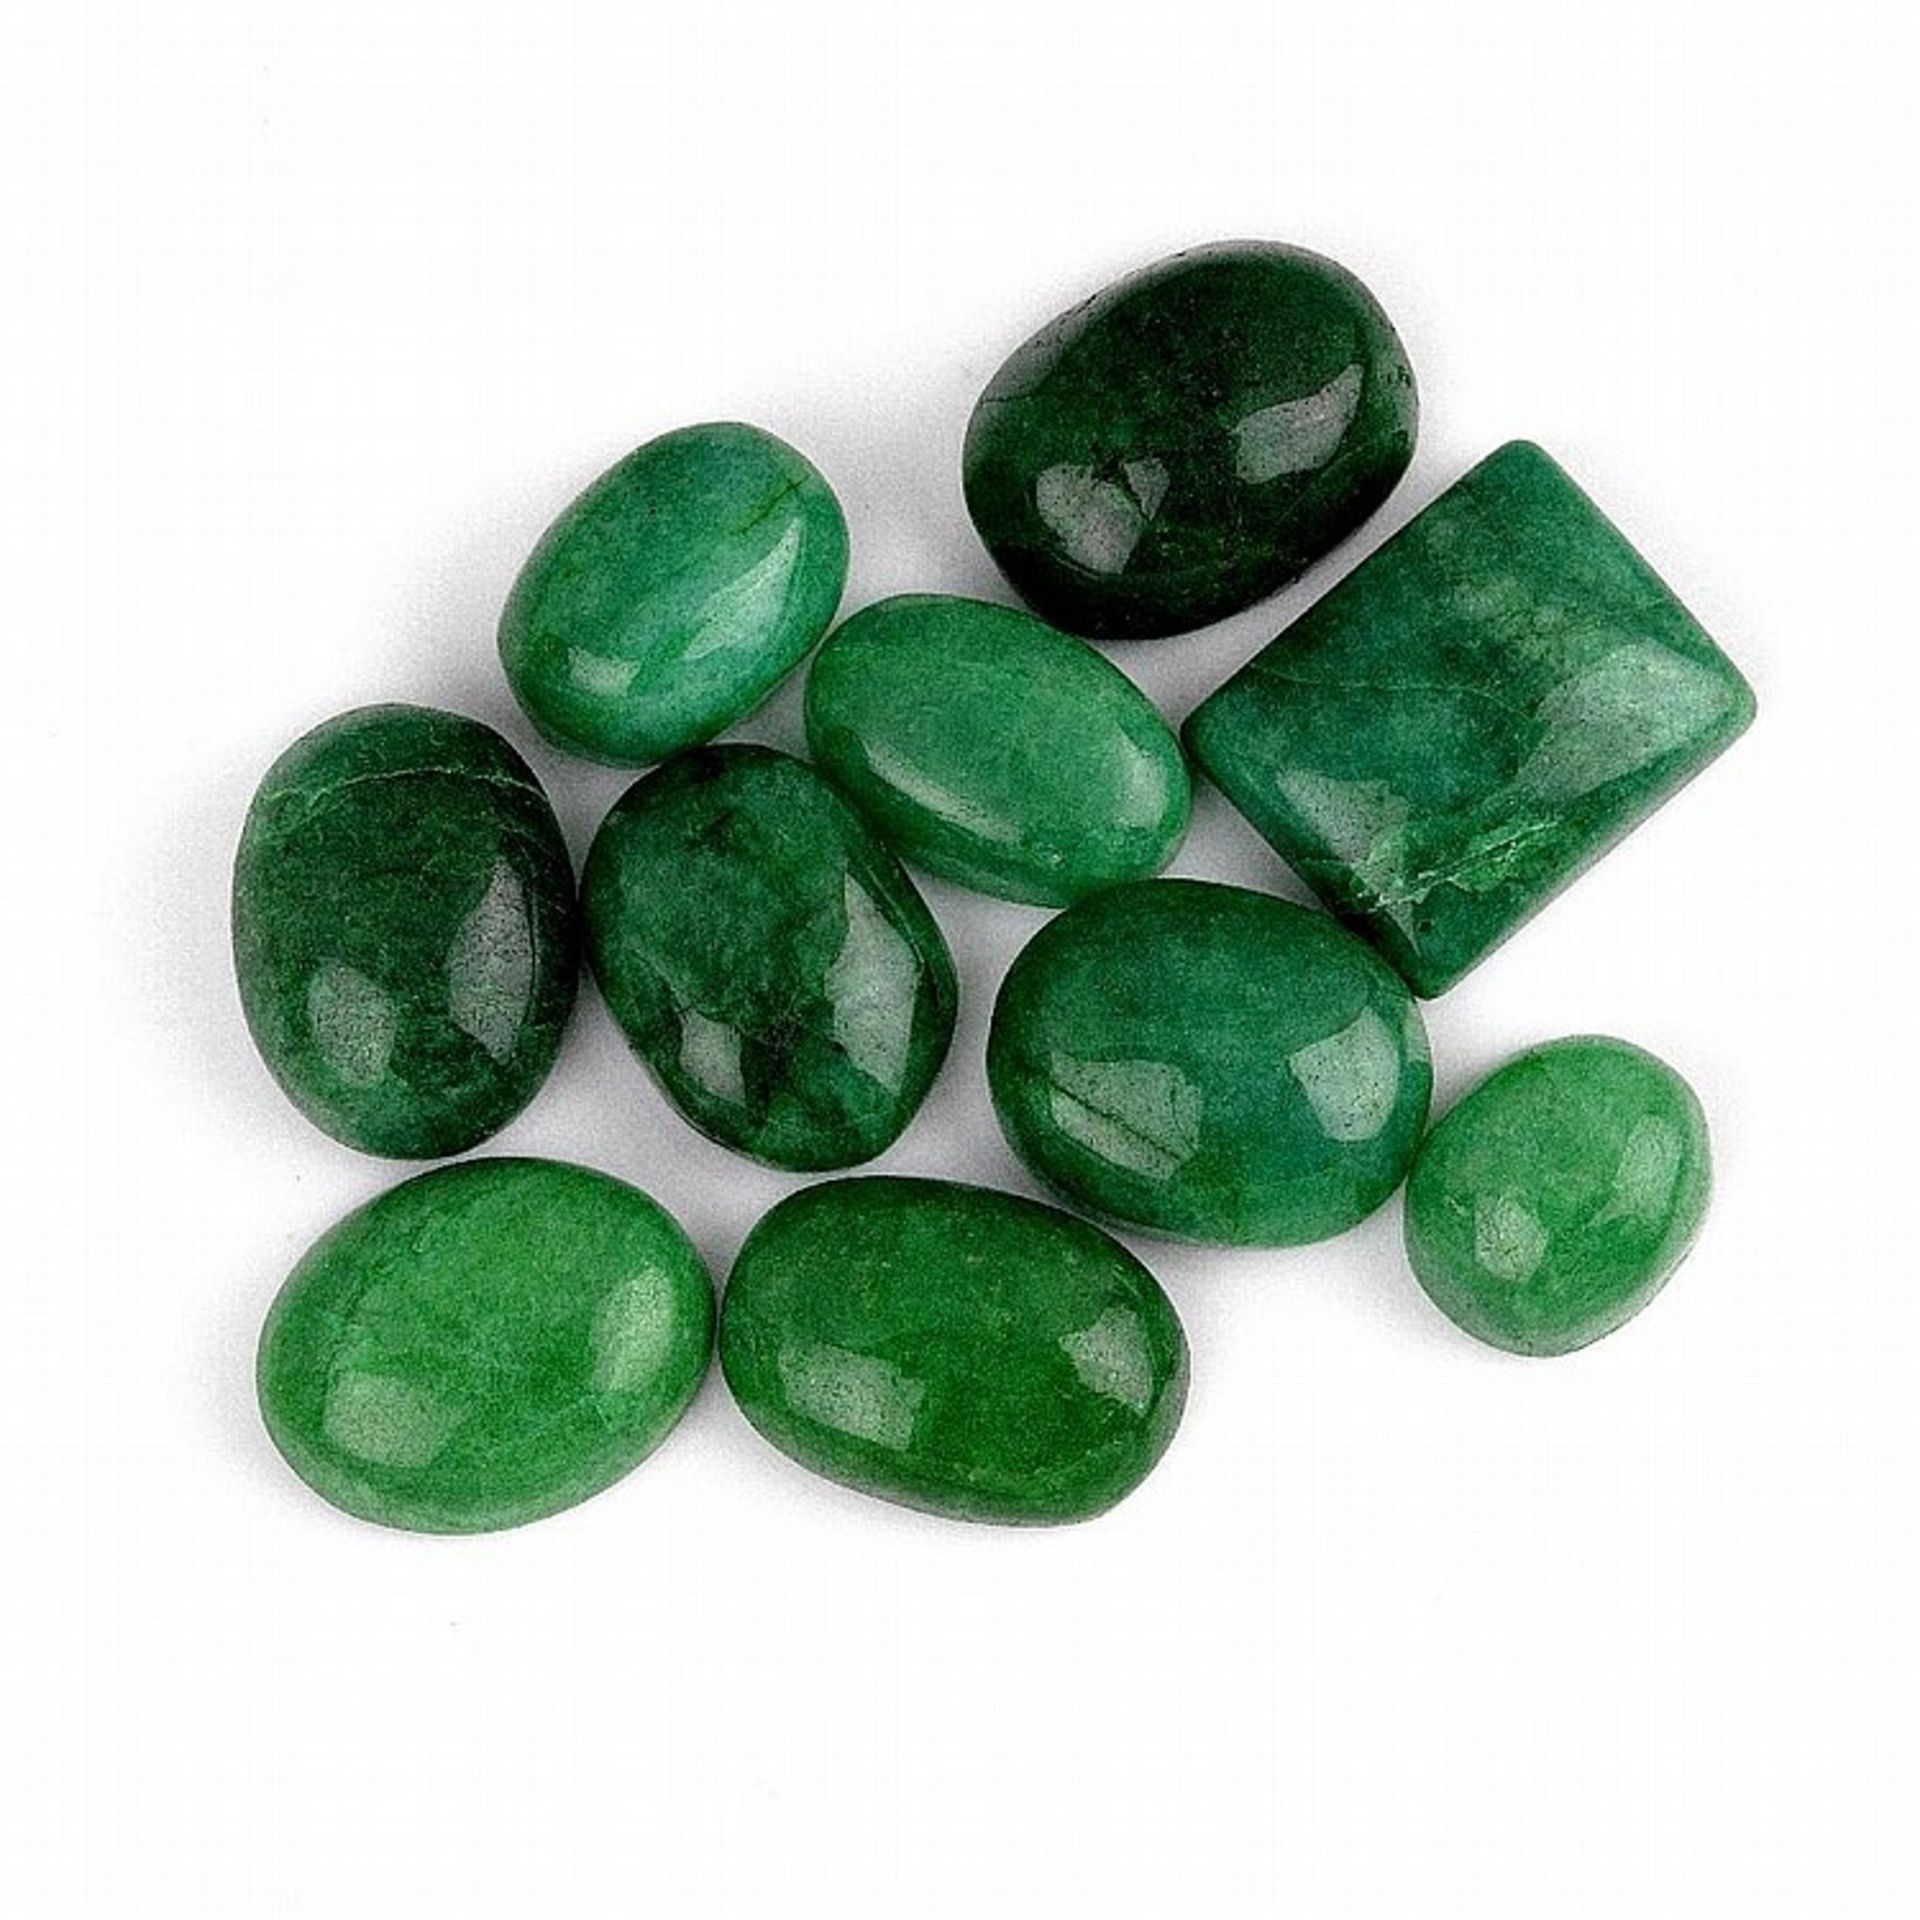 100.00 carat Various Shapes And Sizes Green Beryl collection. Appraised by experienced jewelry